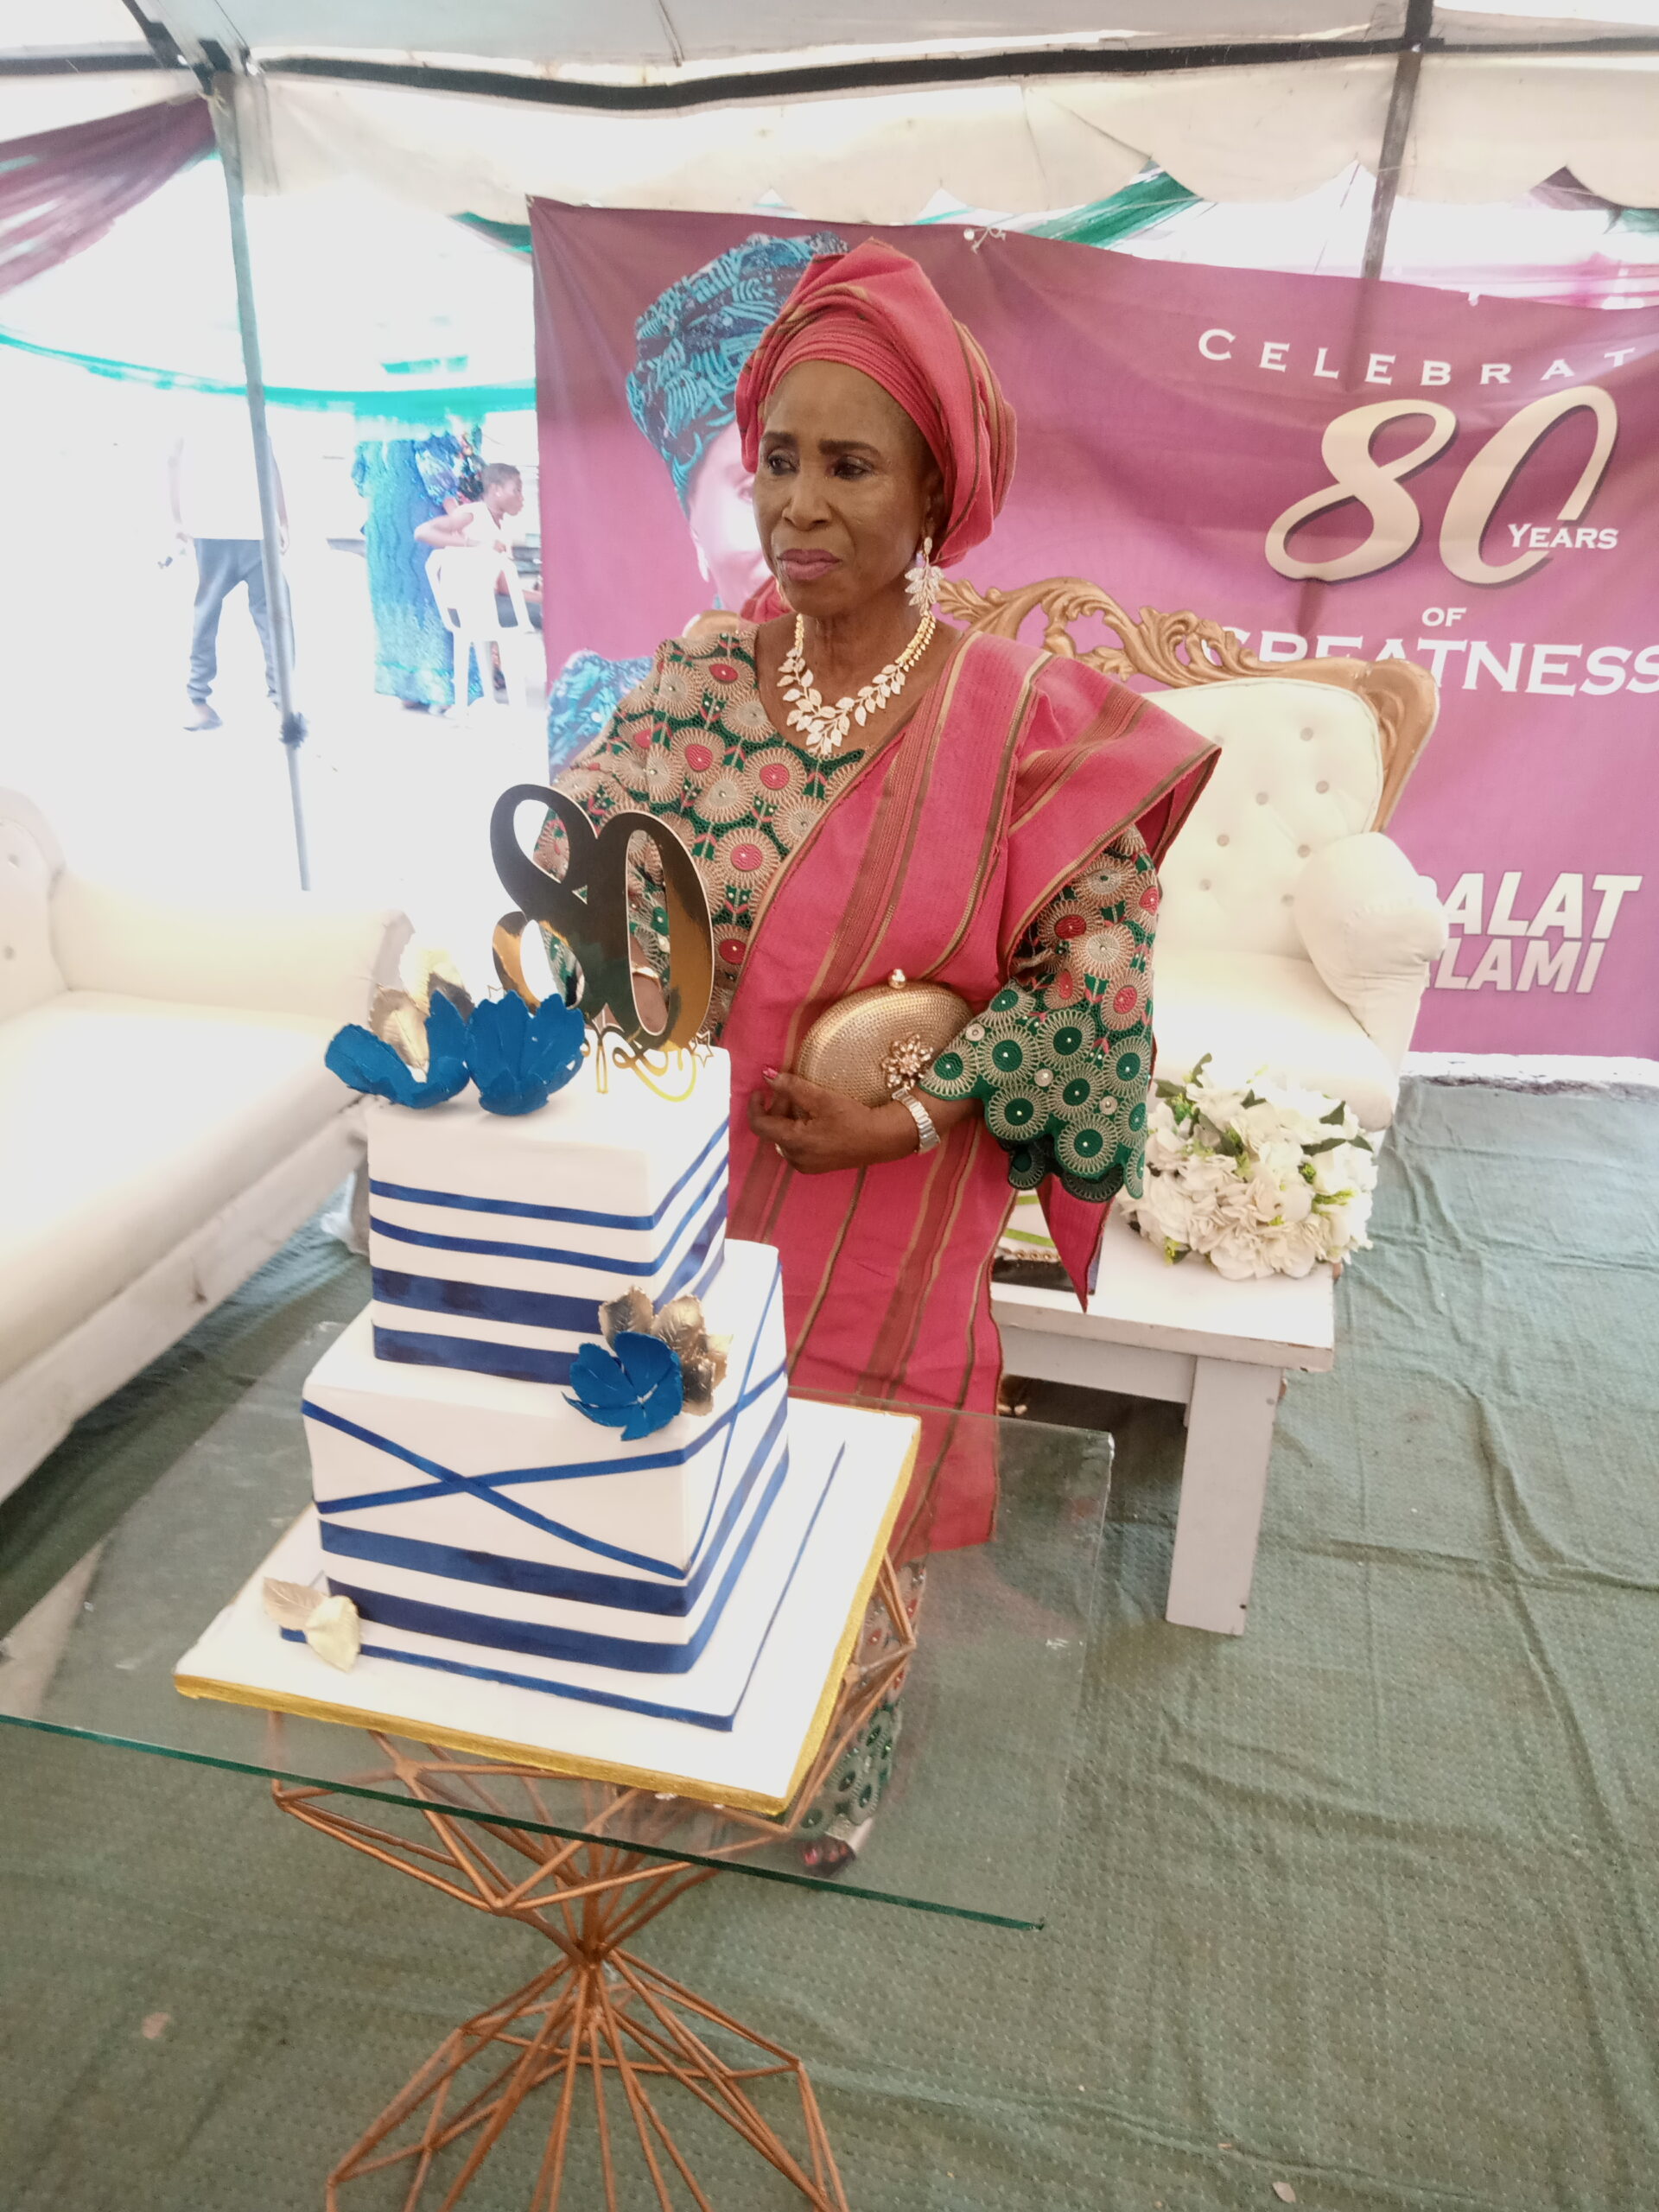 In Pictures, Video, Alhaja Amudalat Ejide Salami's Classy 80th Birthday In Lagos